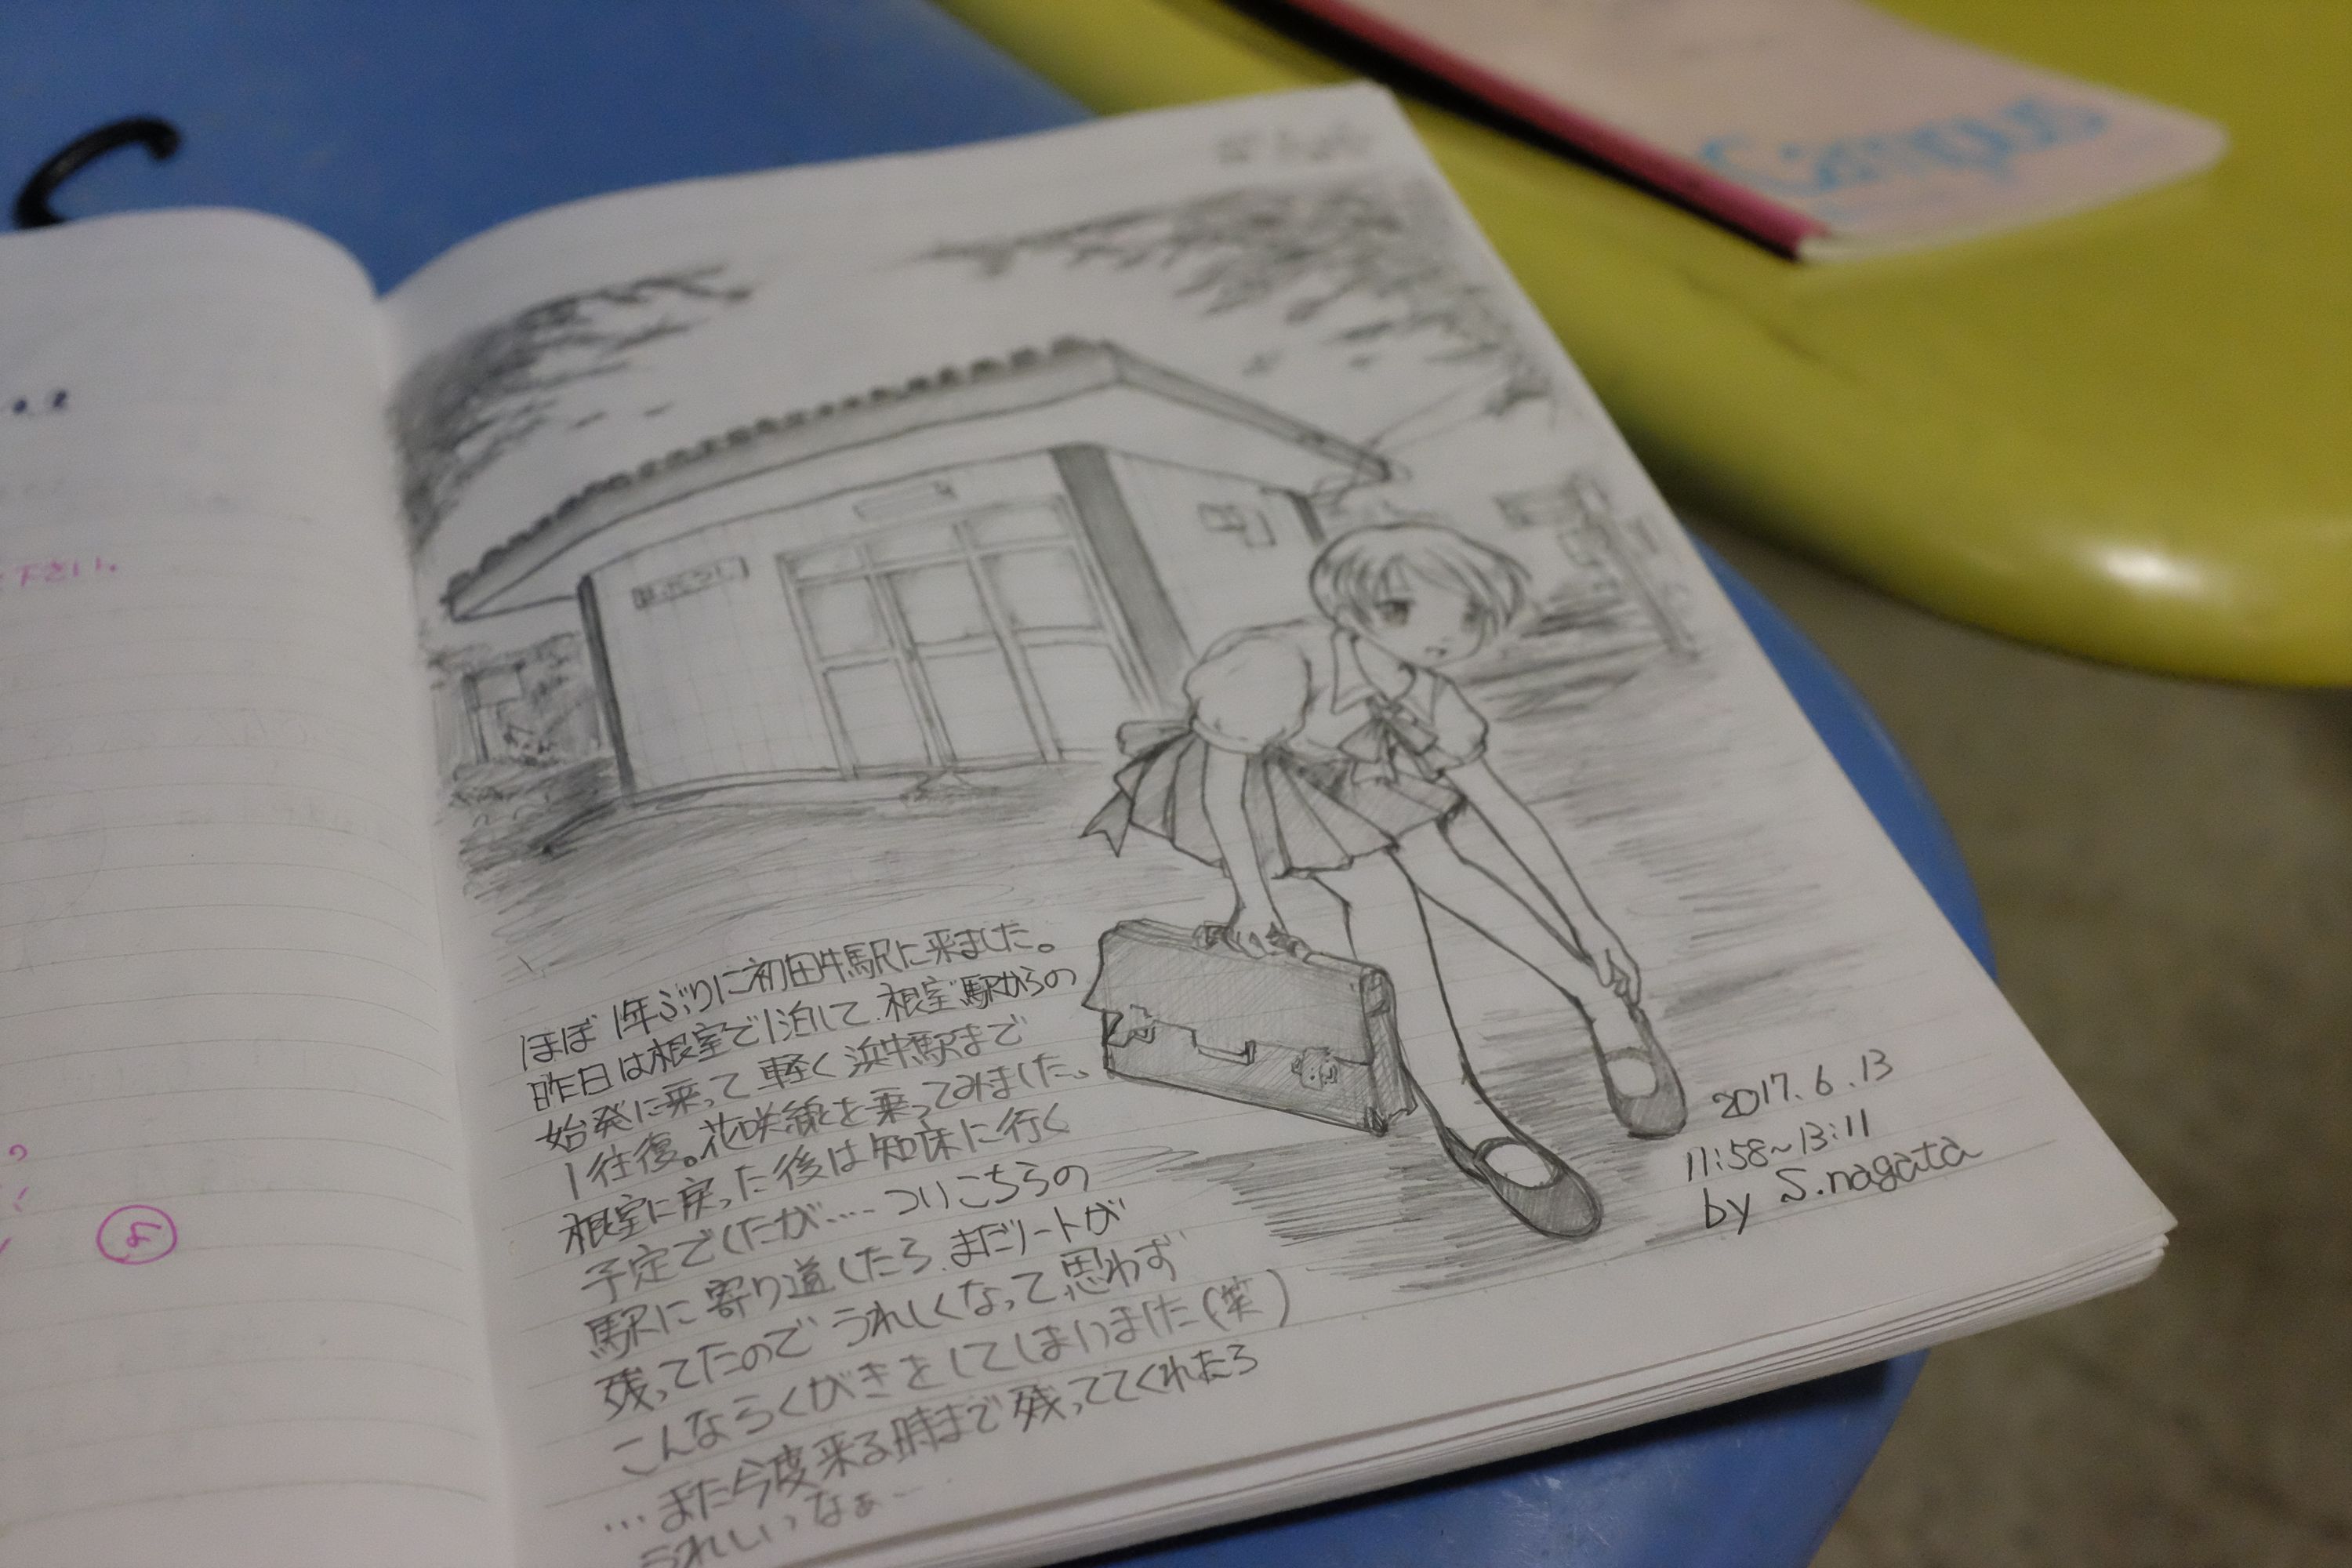 Another page from the same book shows the girl walking away from the station.